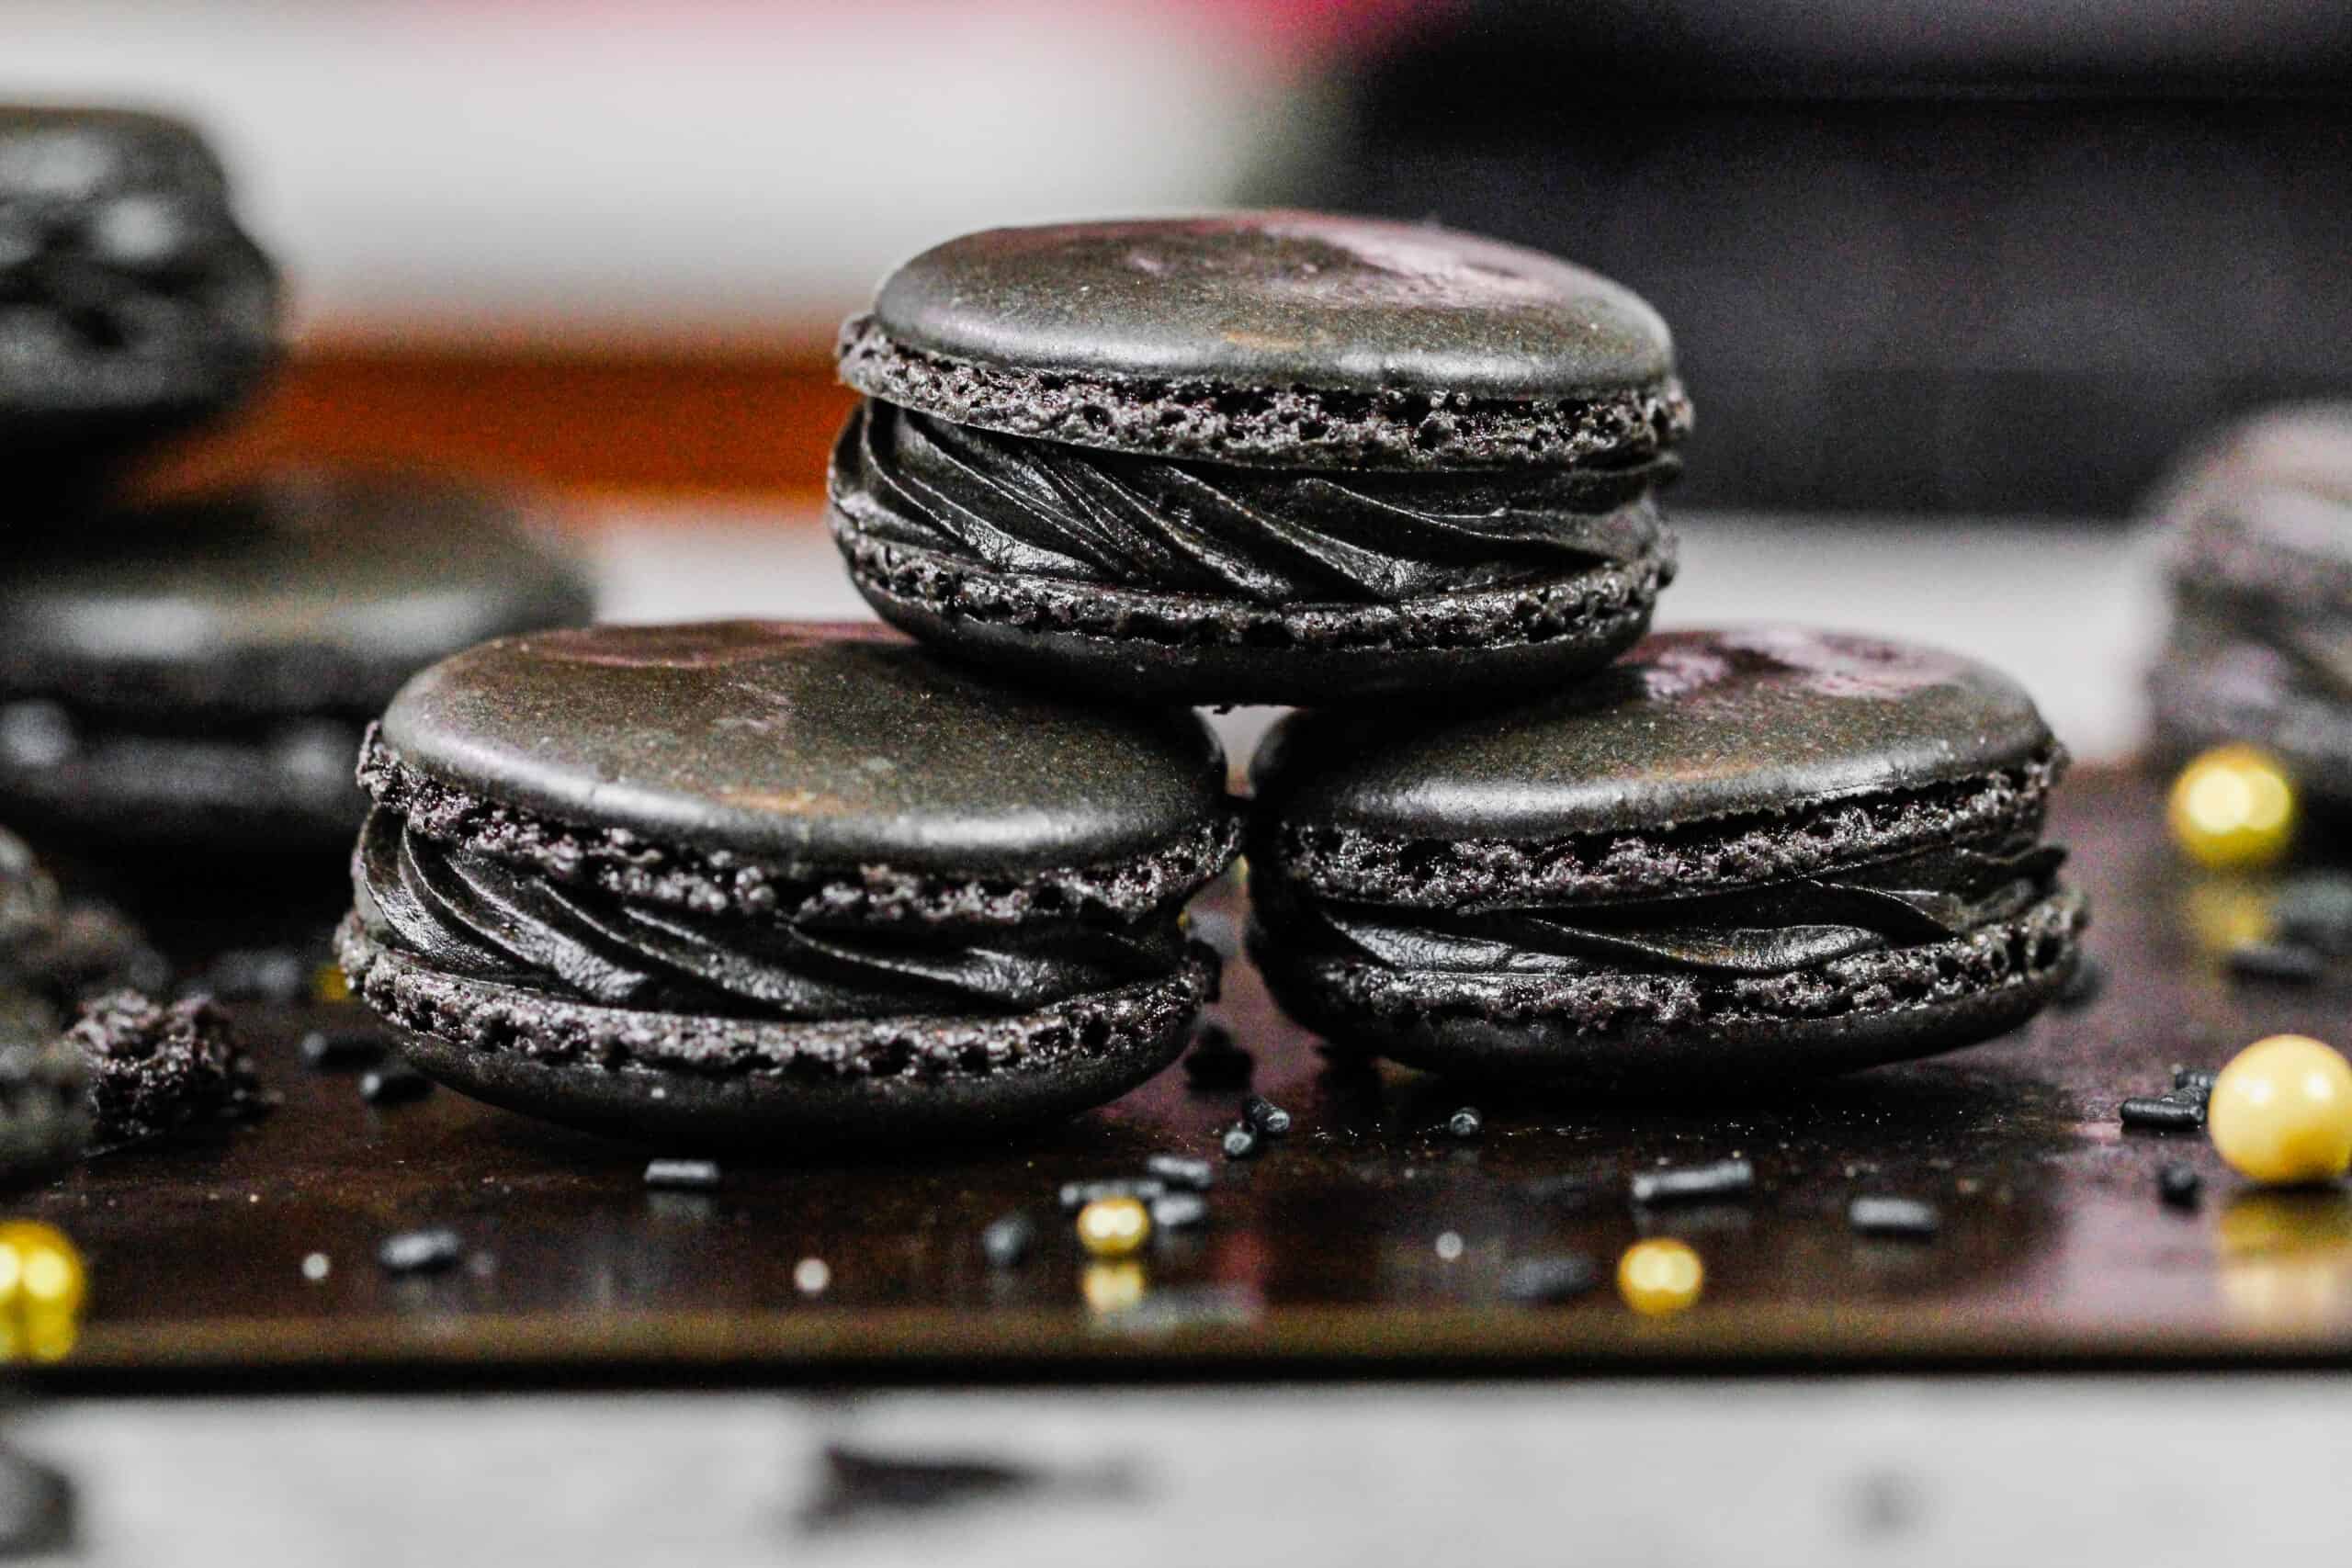 Black Macarons with Decadent Dark Chocolate Filling - Chelsweets